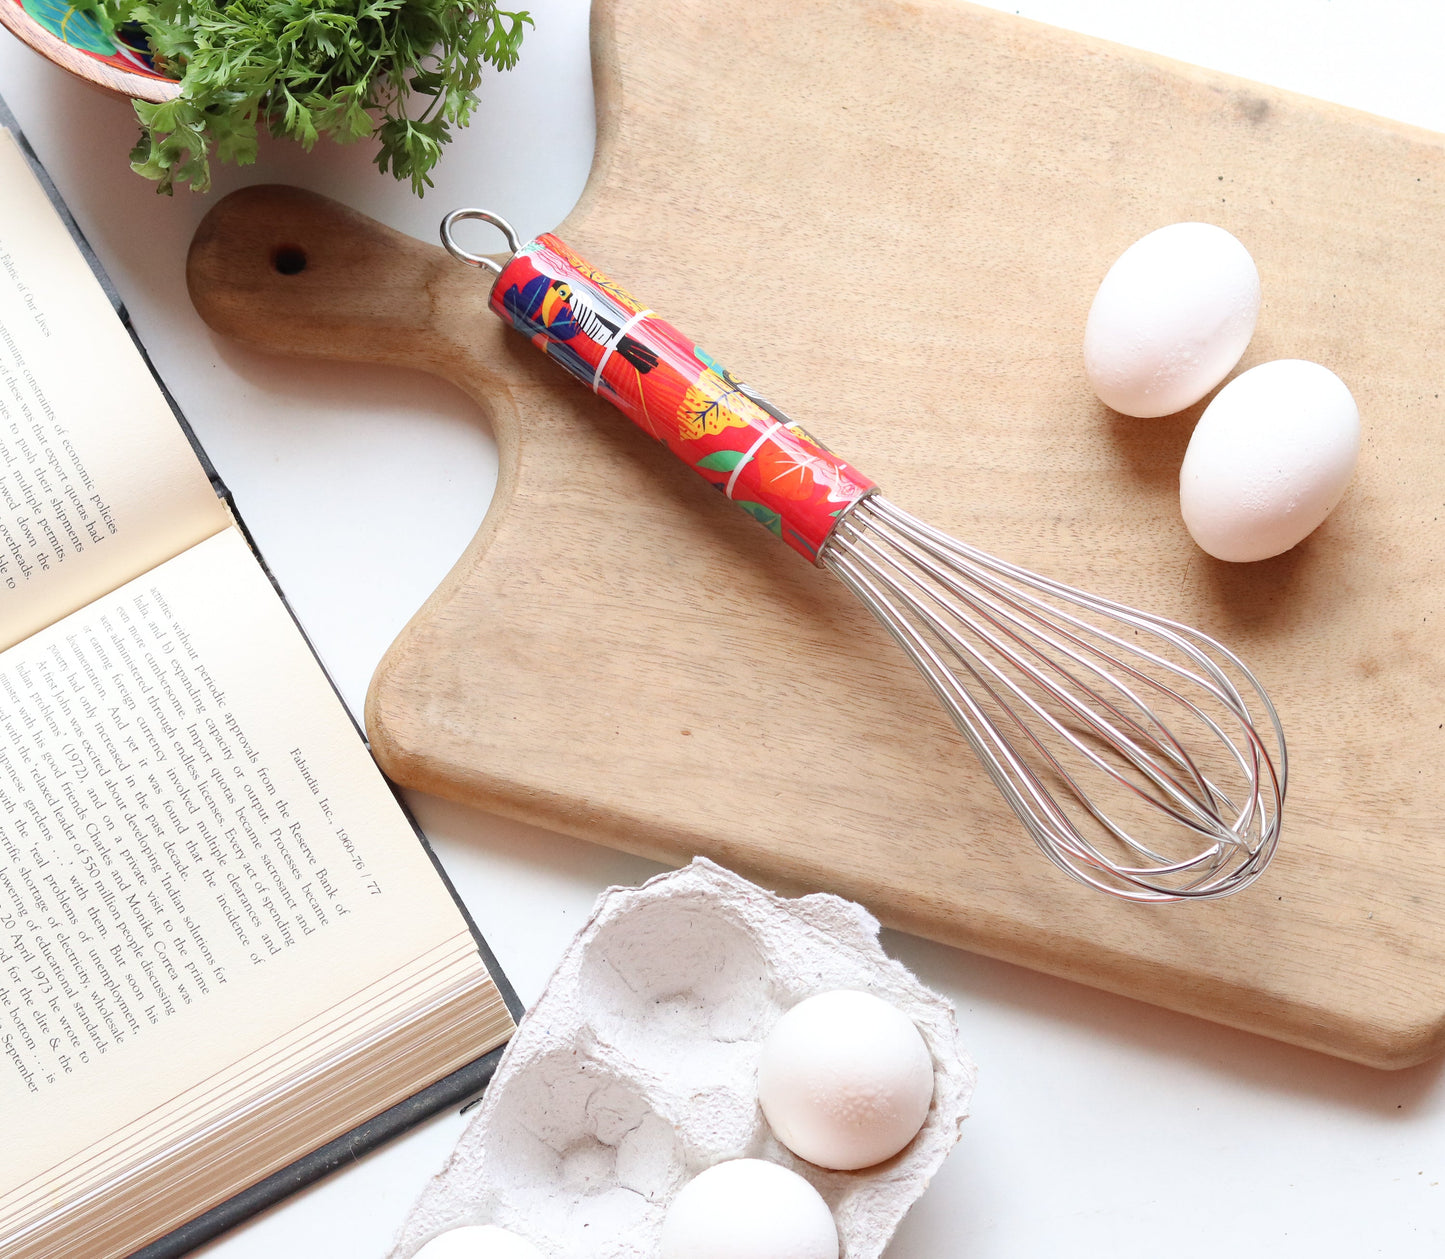 Baking gift set - Hand whisk and set of 2 kitchen towels - Wire whisk - Tea towels set - Together